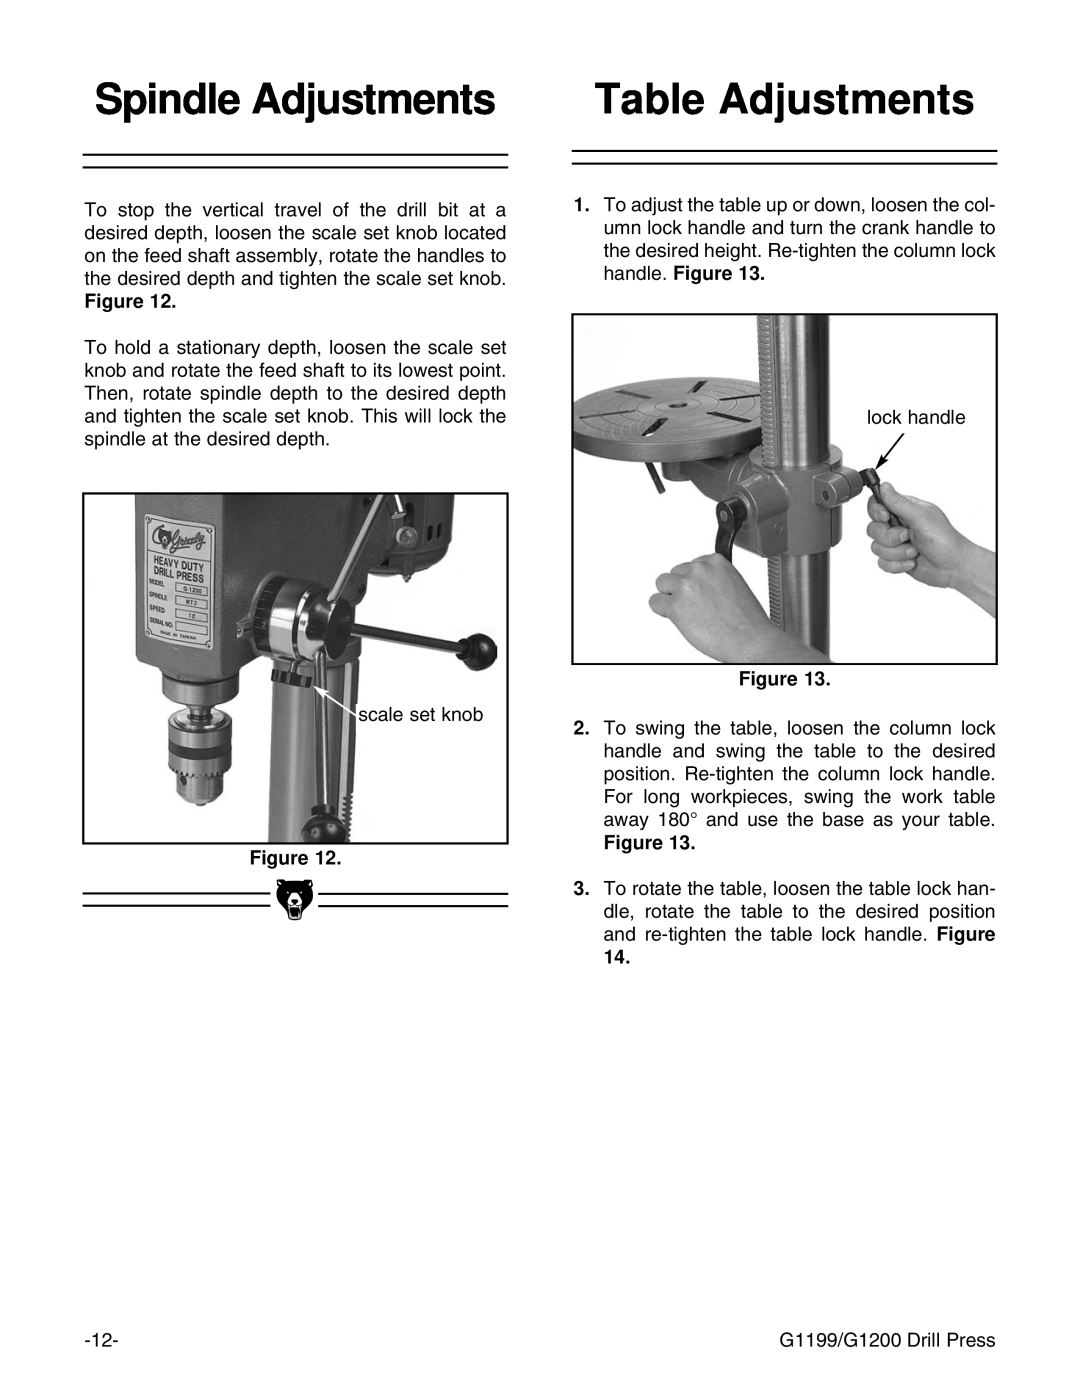 Grizzly G1199, G1200 instruction manual Table Adjustments, Spindle Adjustments 